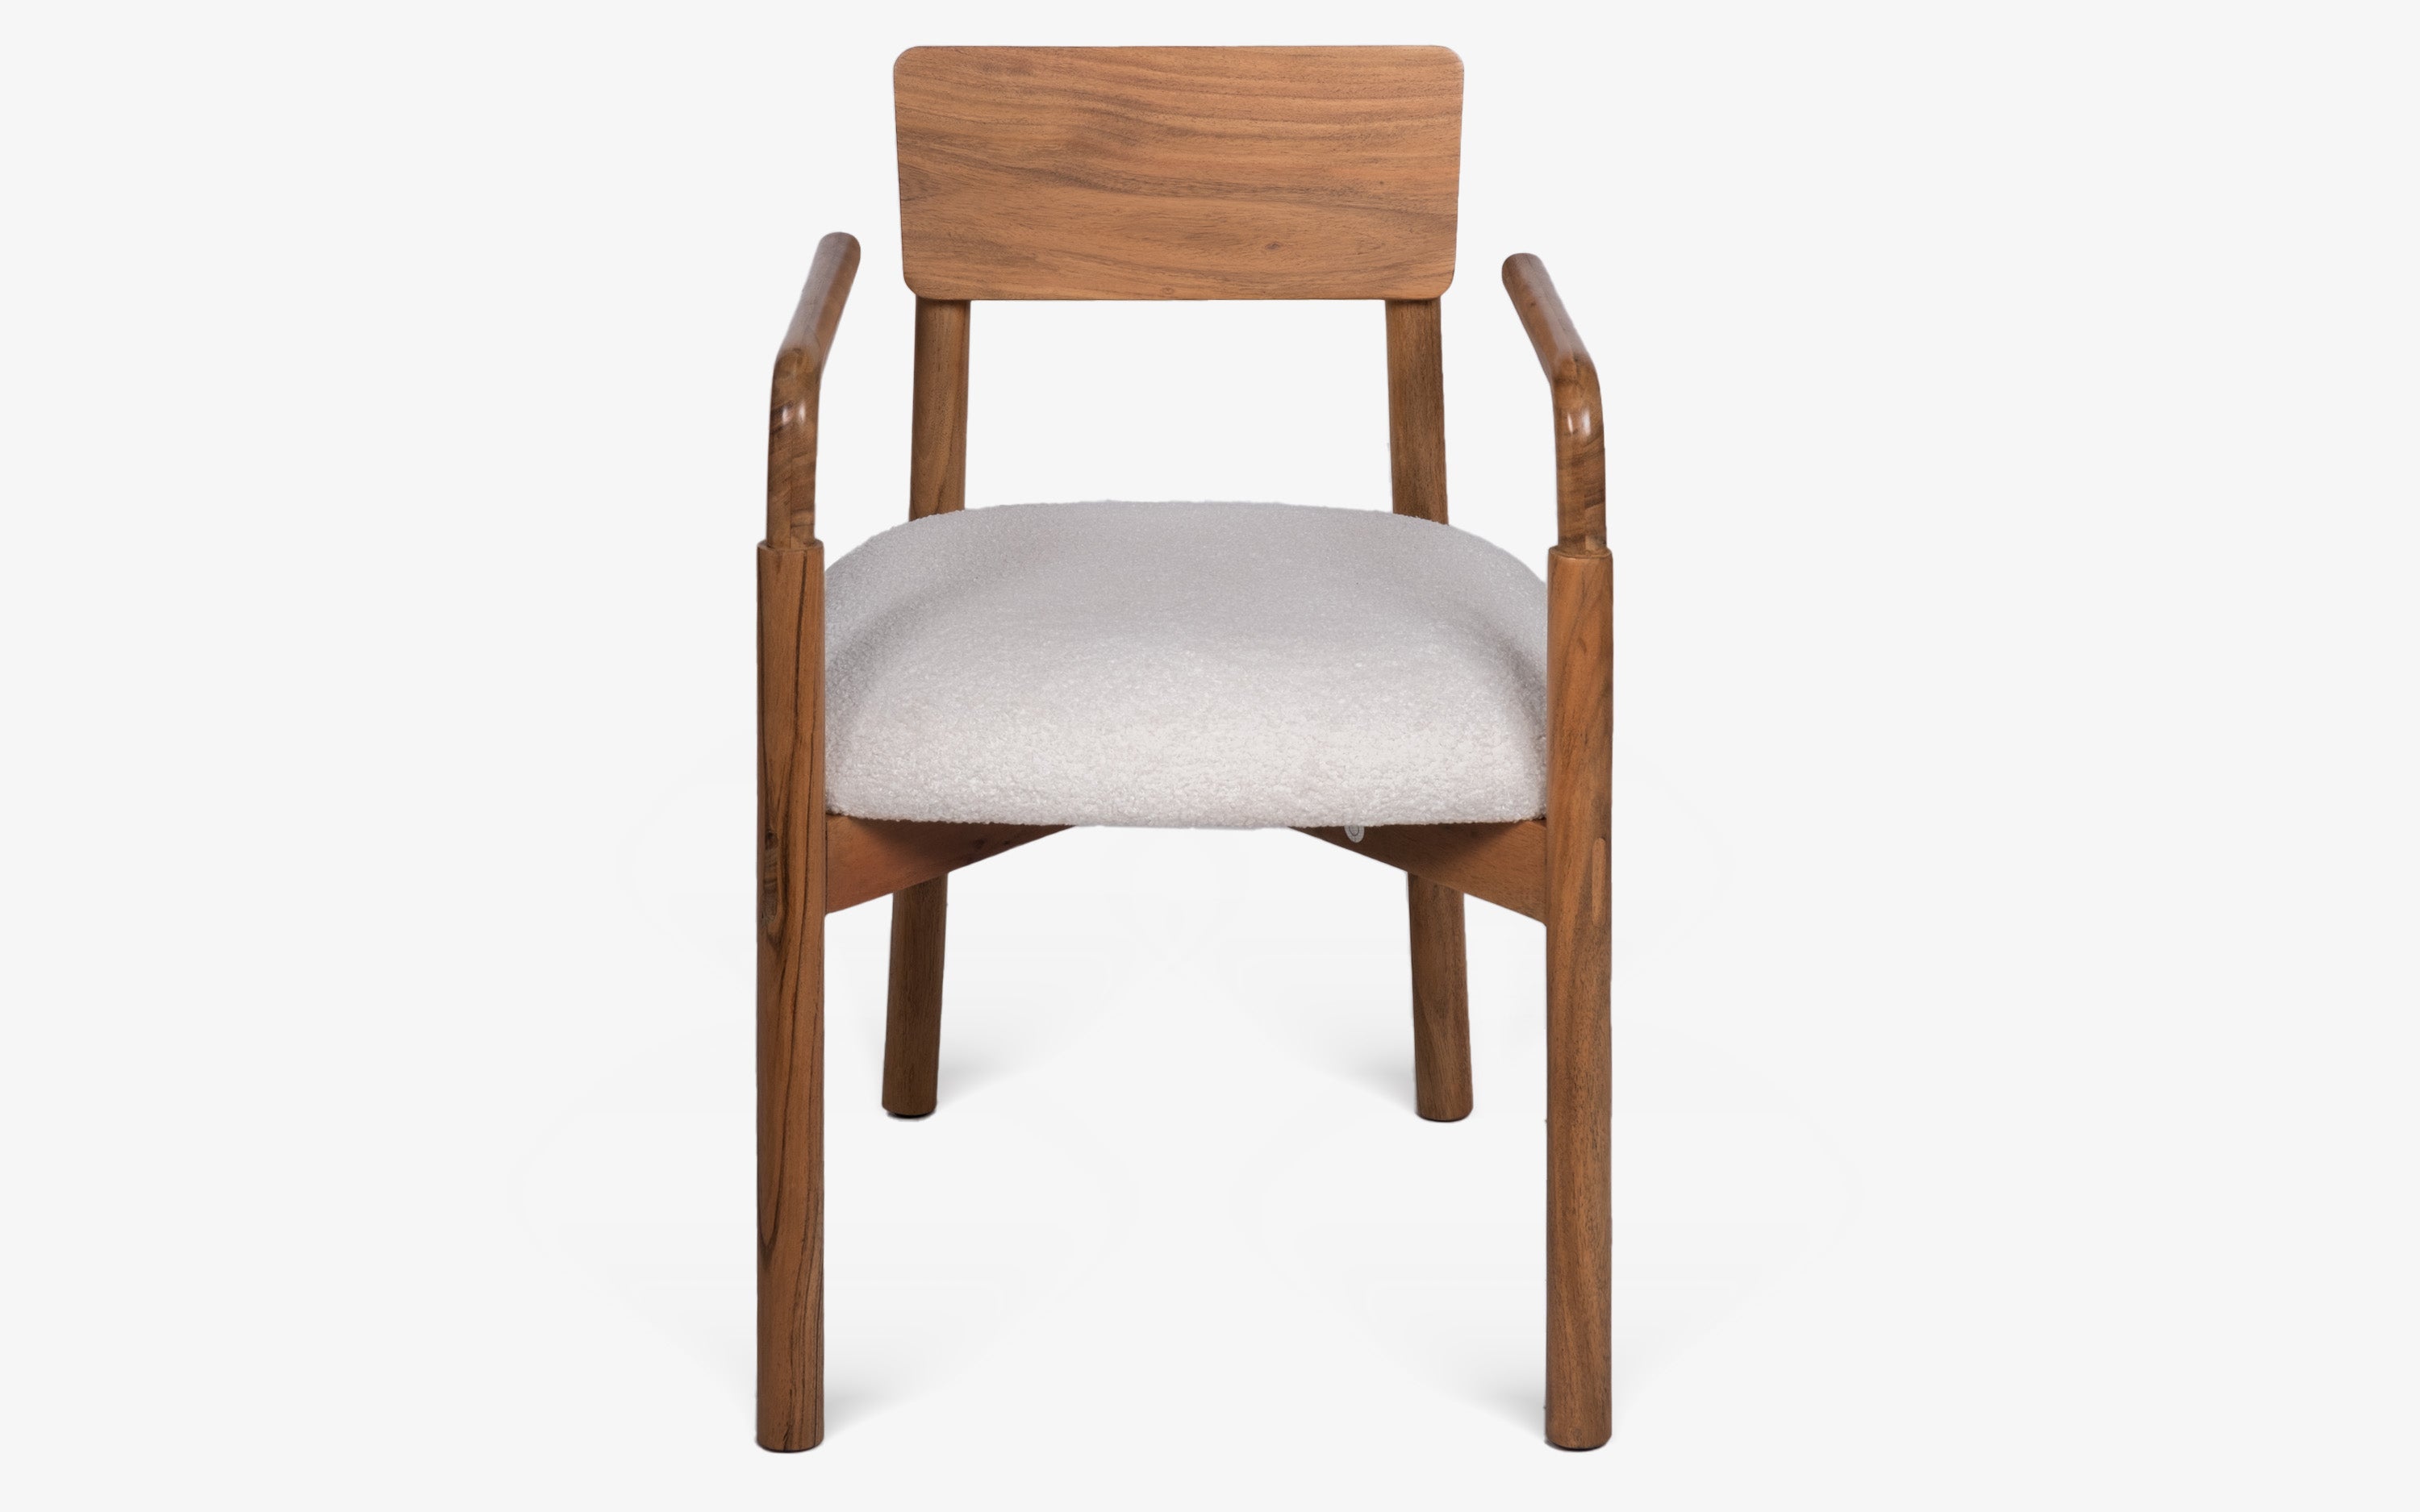 Andaman relax chair wooden. Andaman wooden chair for study. Andaman comfortable chairs for home. OT Home